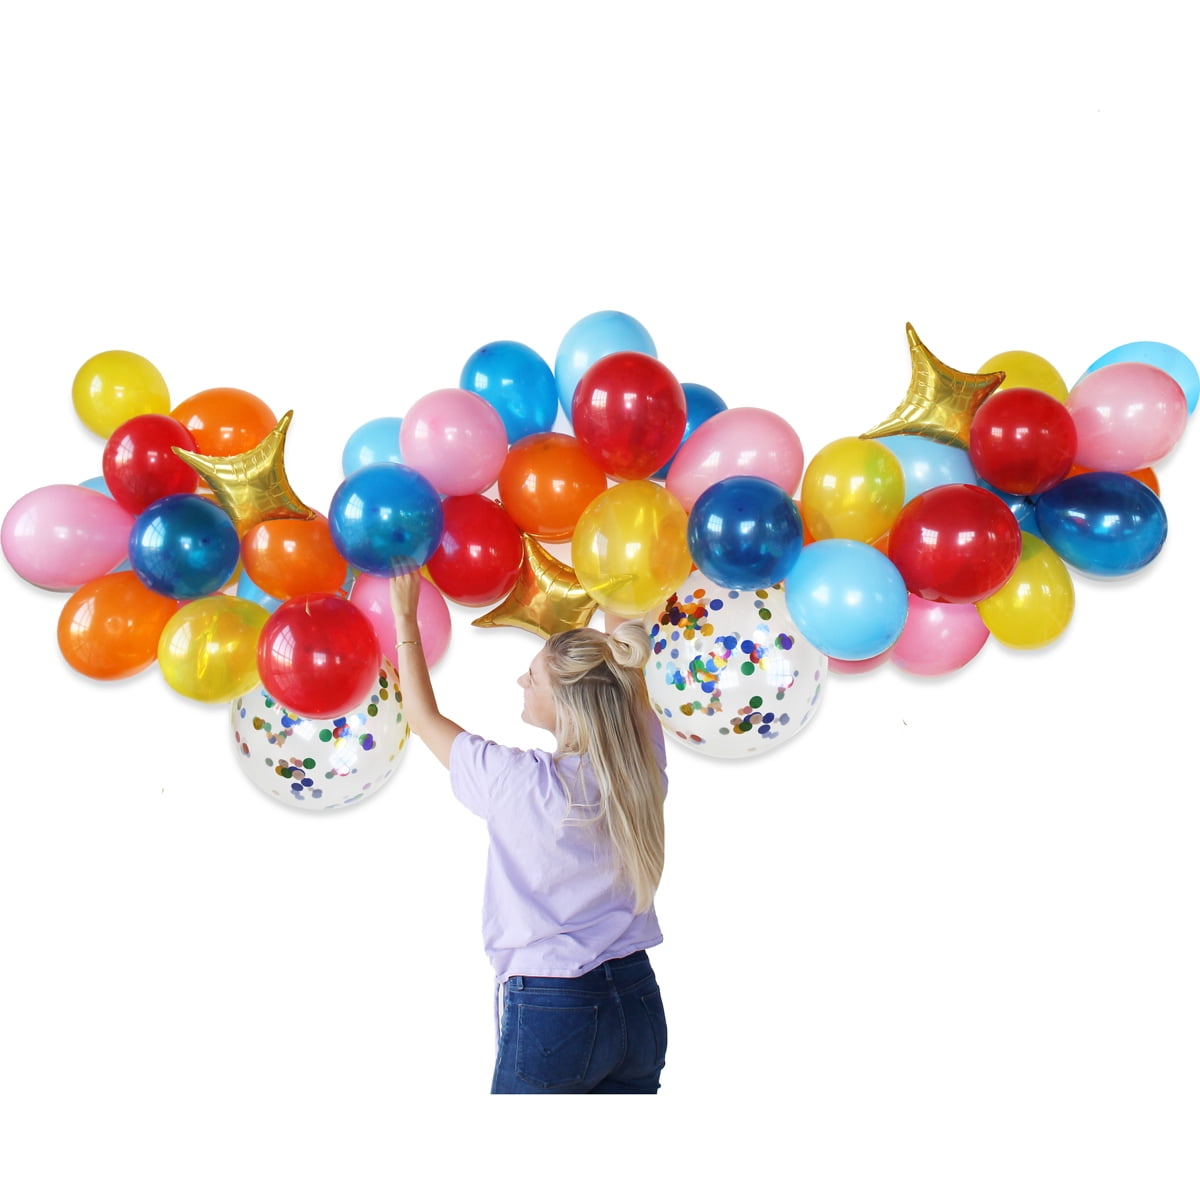 Packed Party "Here to Party" Balloon Garland Kit